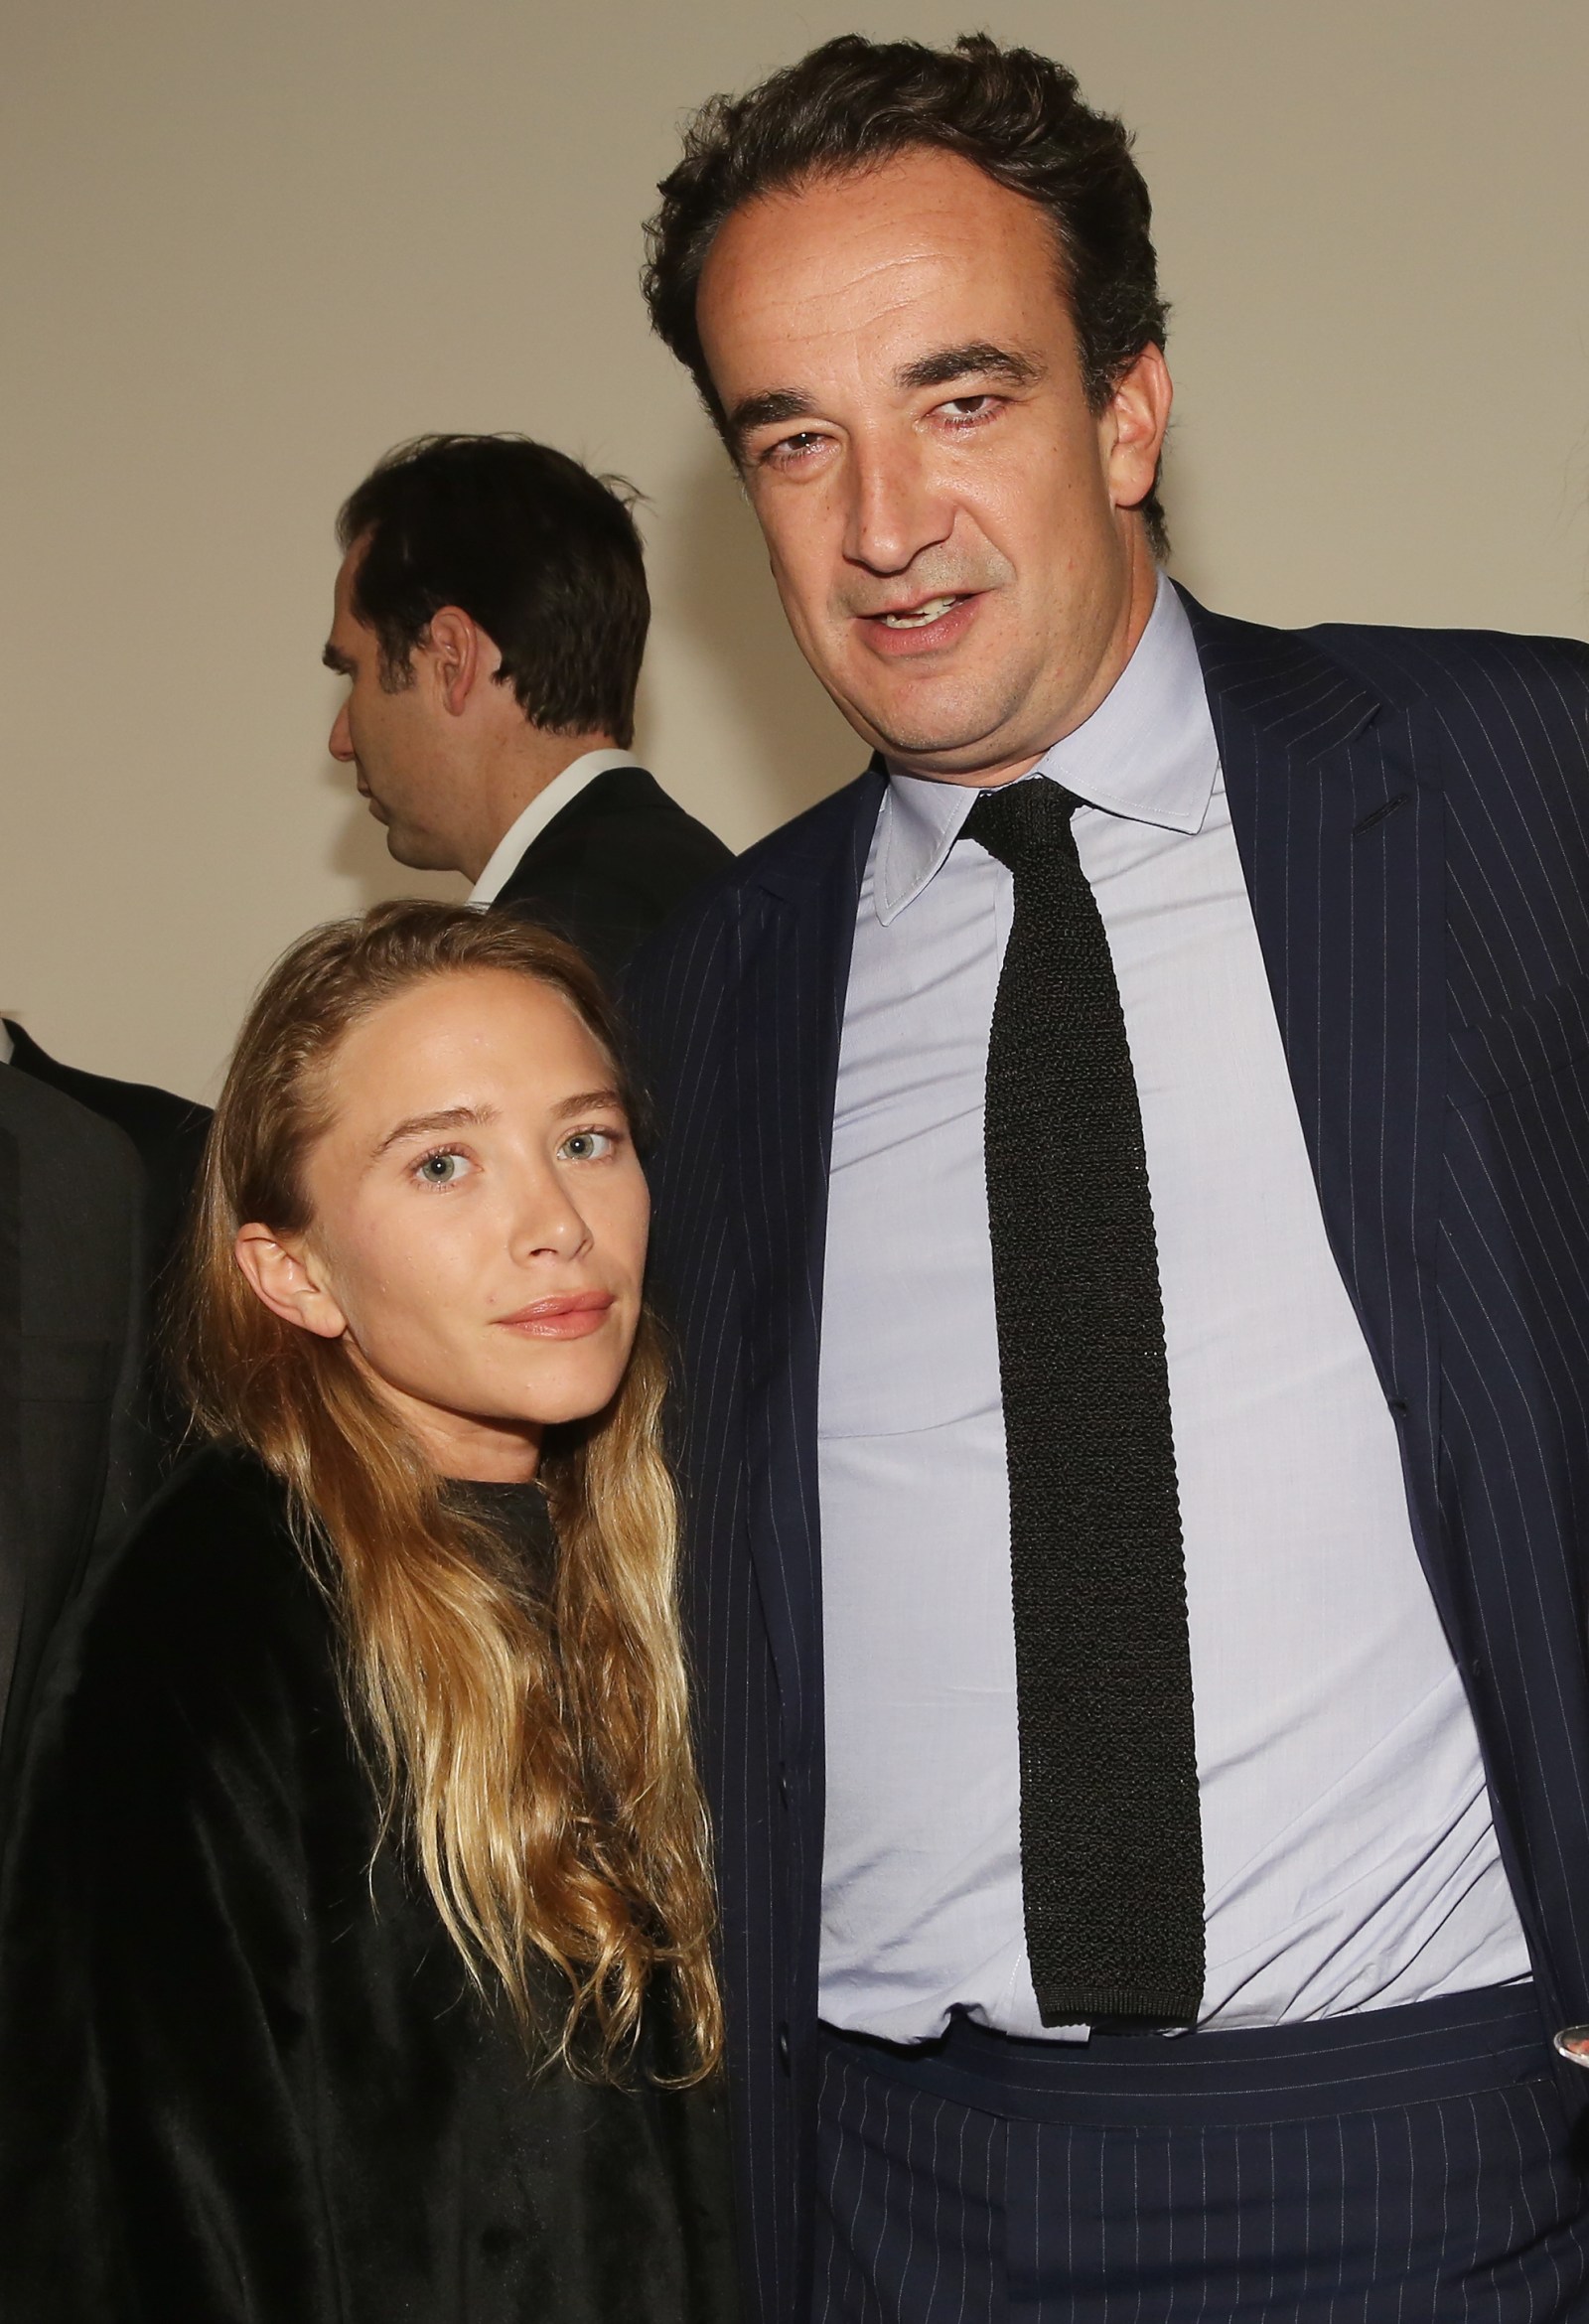 Chilling Photos Of Mary-Kate Olsen And Husband Olivier Sarkozy